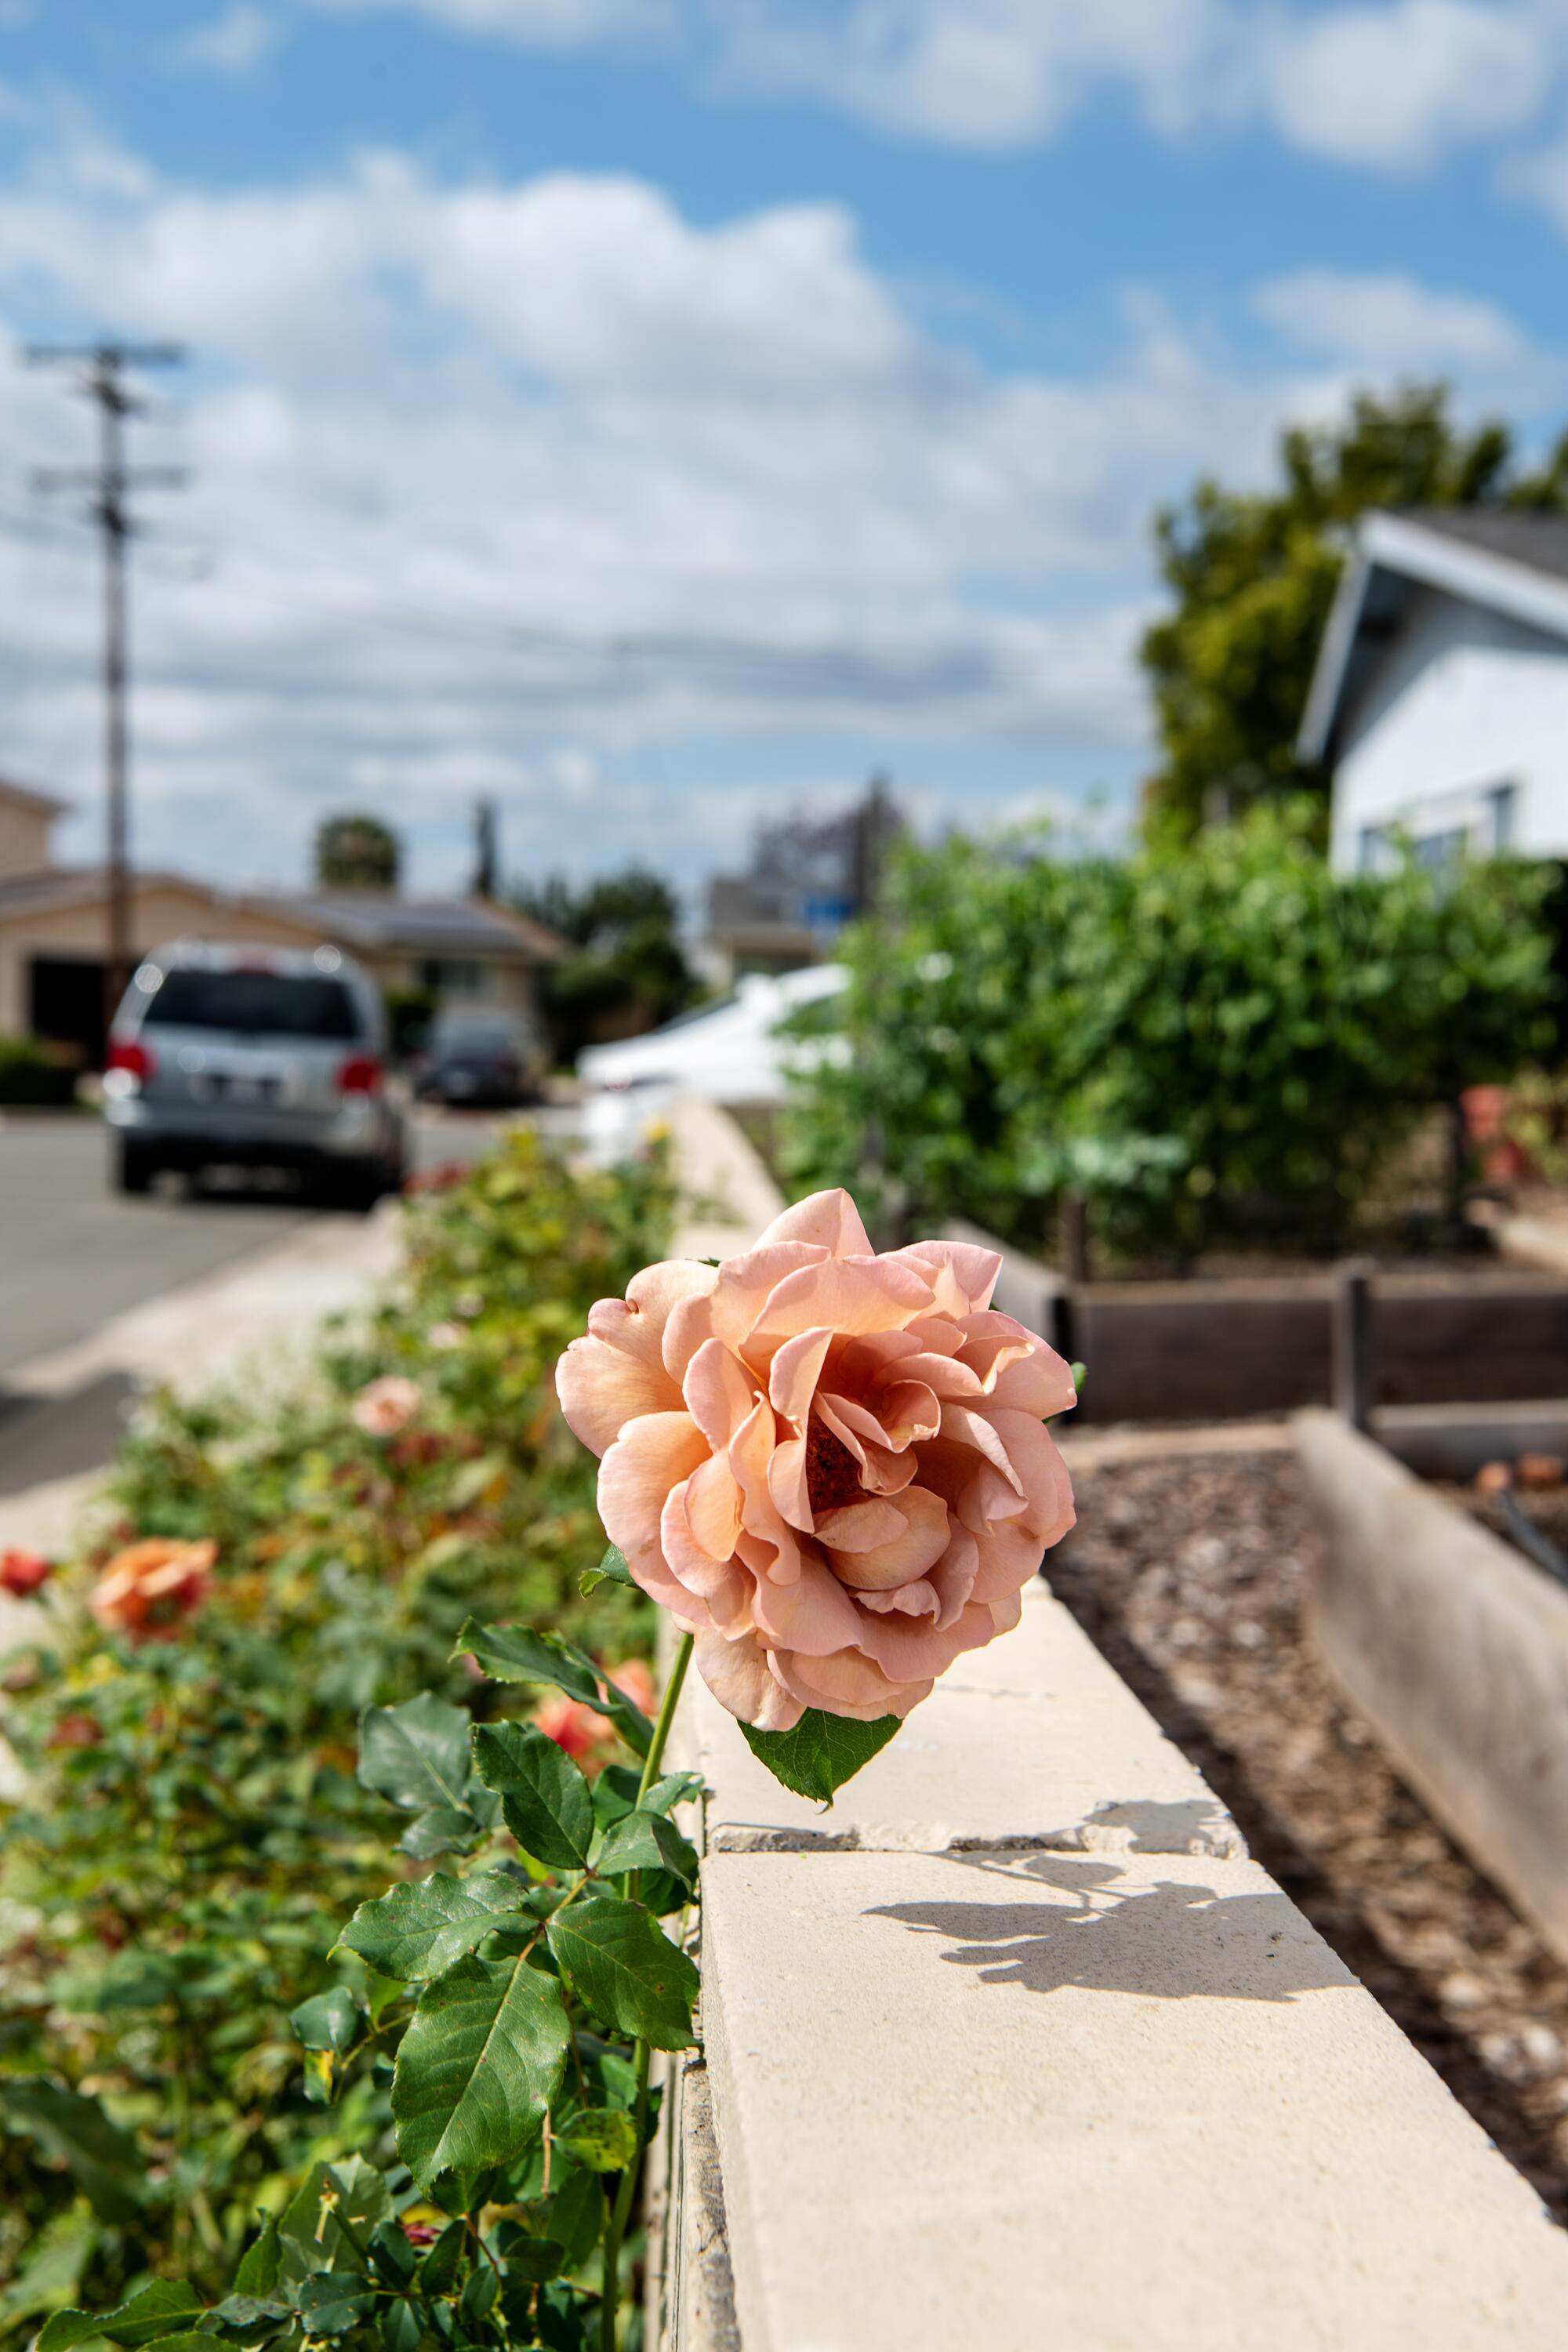 Salmon-colored roses grow along the sidewalk in front of Kellogg's home.